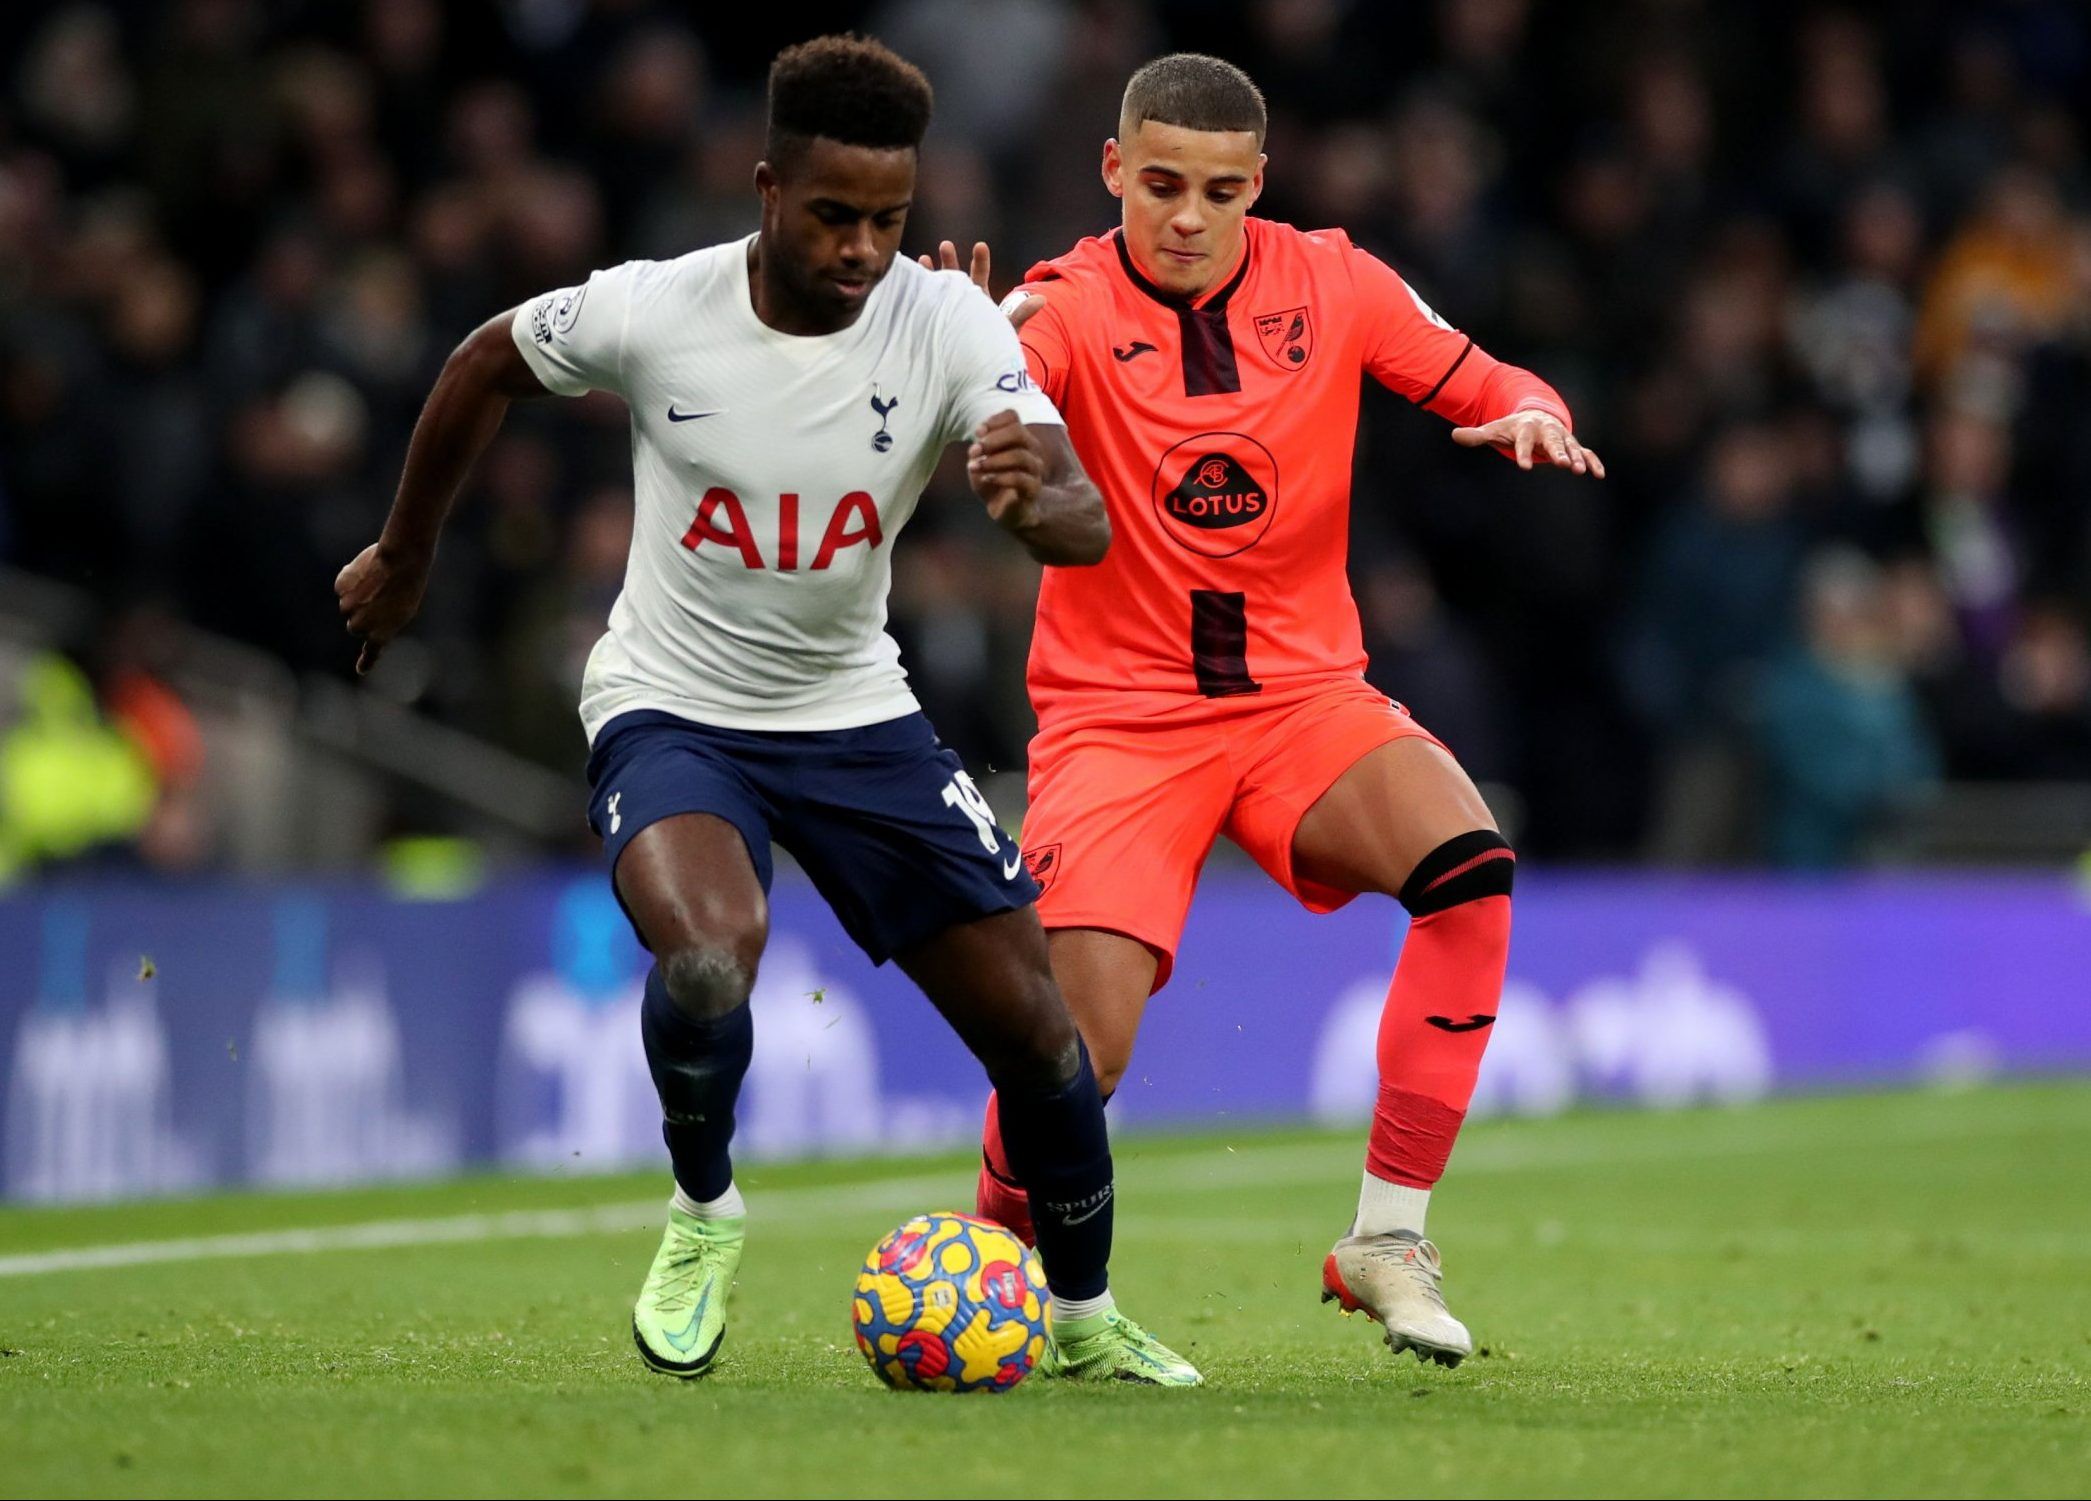 Spurs wing-back Ryan Sessegnon in action against Norwich City's Max Aarons